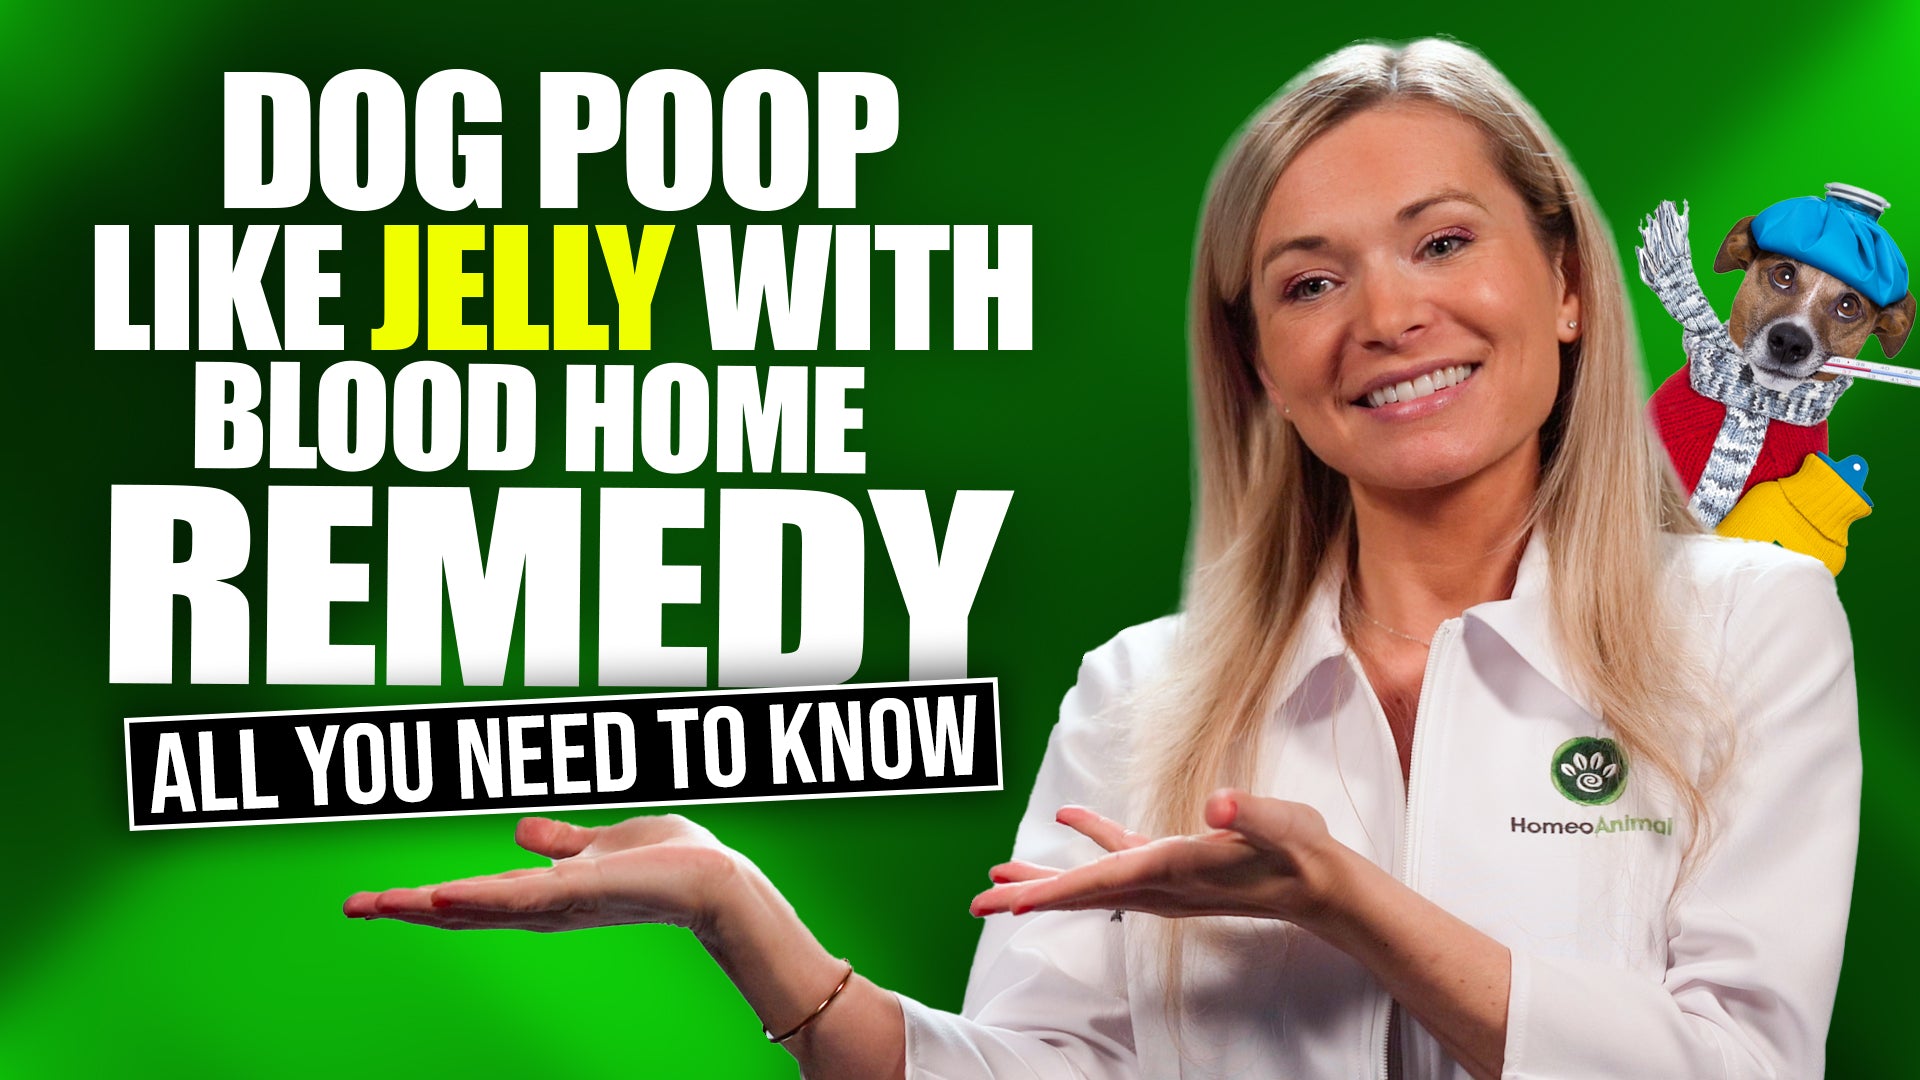 Dog Poop Like Jelly With Blood Home Remedy | 5 NATURAL Ways to Do It Properly